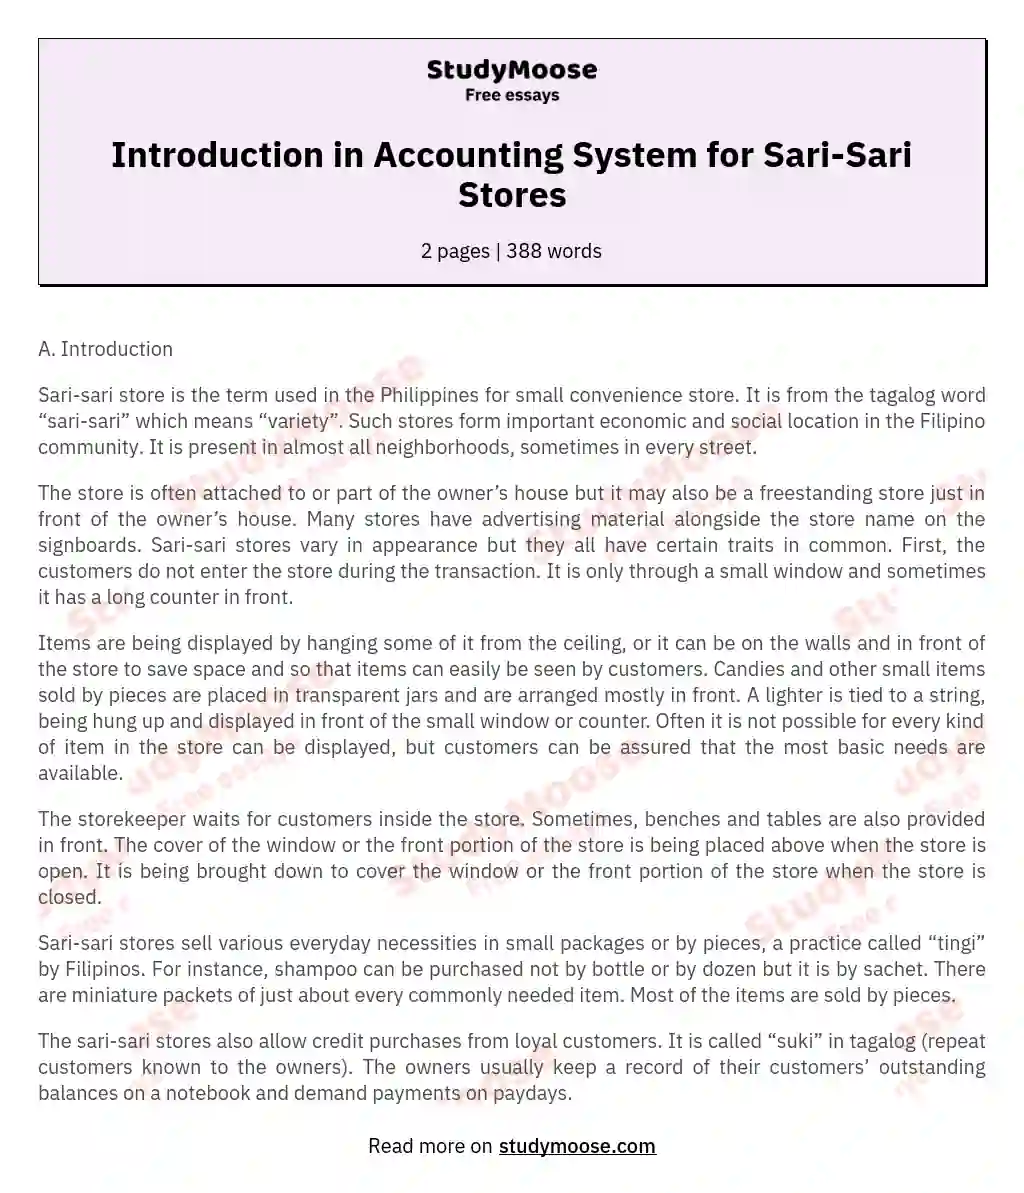 Introduction in Accounting System for Sari-Sari Stores essay